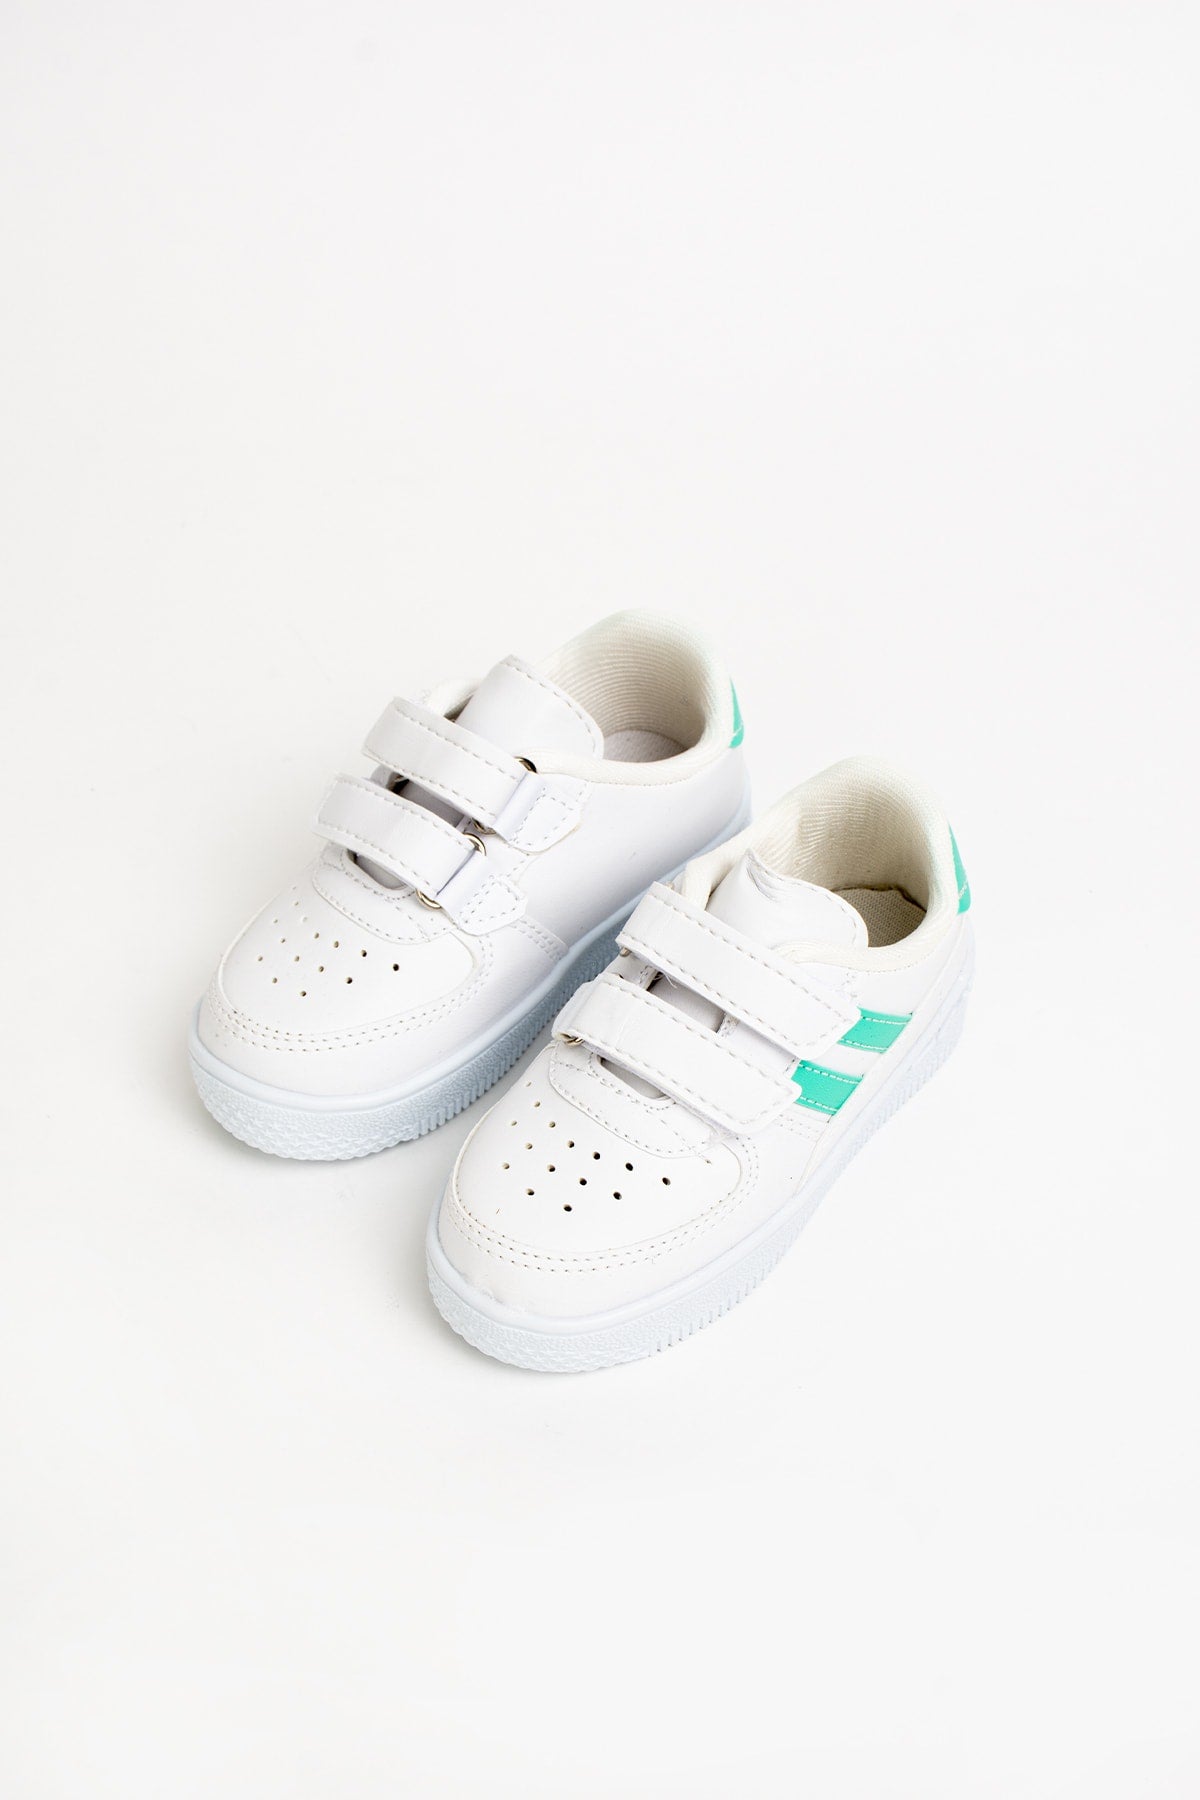 Kids White Green Sneakers Kids Shoes